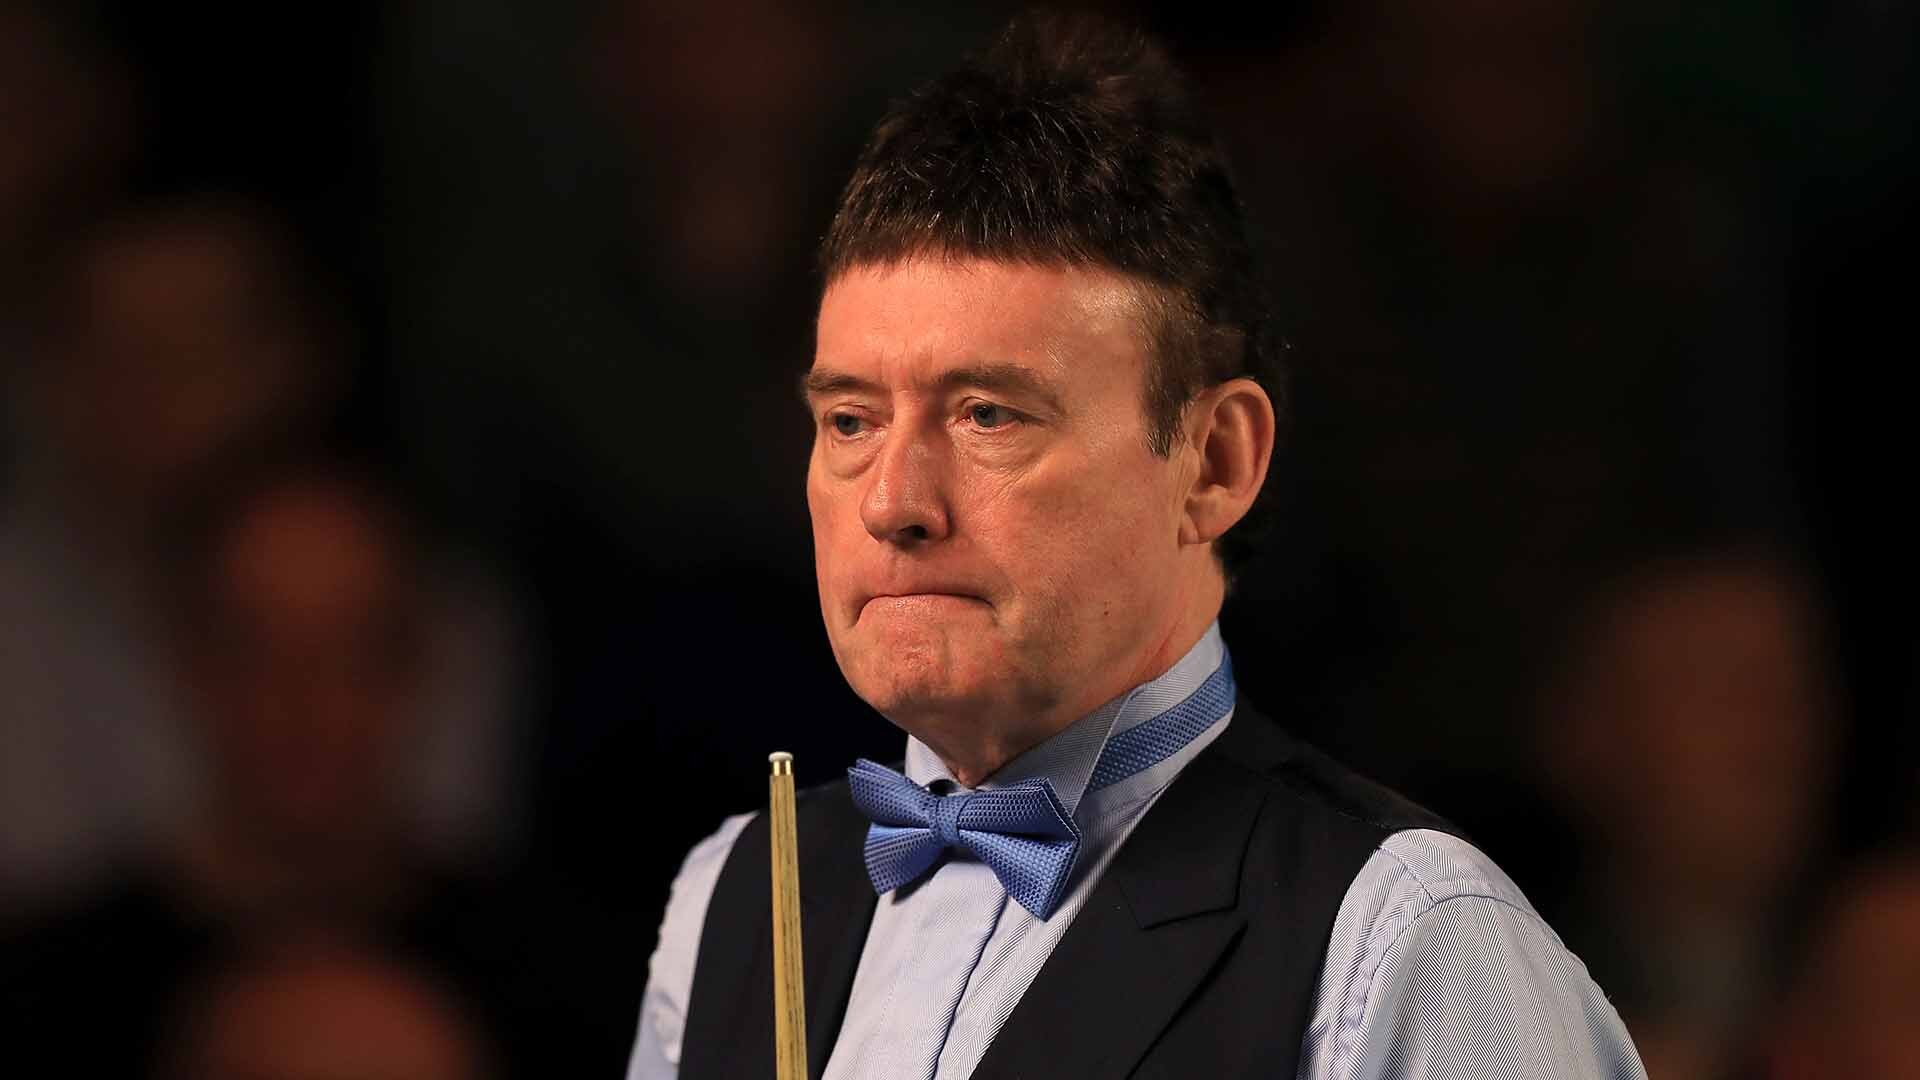 World Seniors Snooker Championship 2023 Draw, schedule, betting odds, results and live BBC TV coverage details for the major featuring Jimmy White and Stephen Hendry